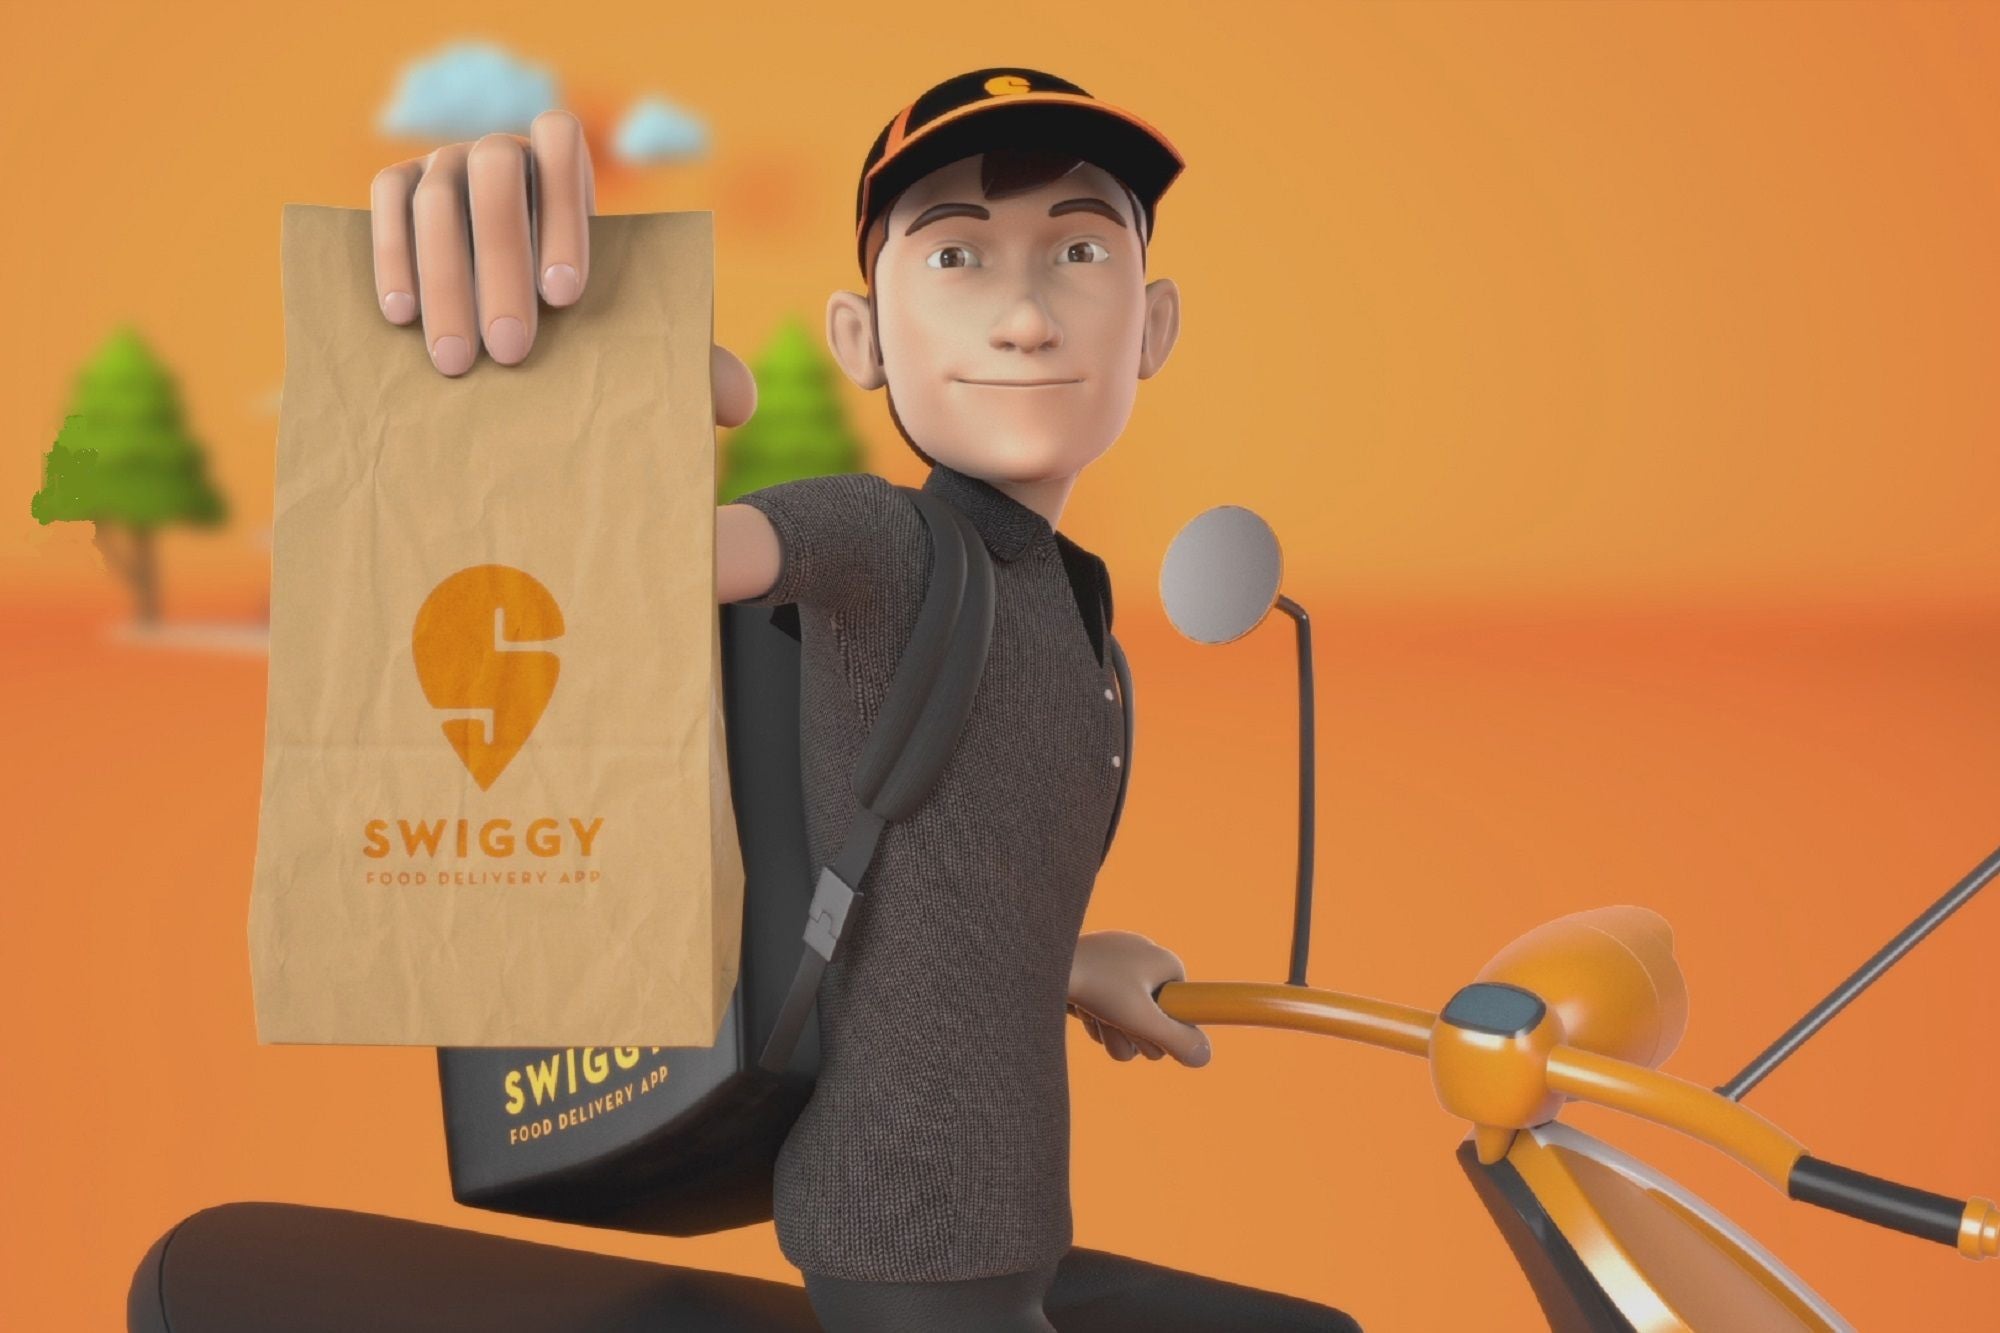 Charging Panchkula man Rs 4.50 GST on soft drink costs Swiggy Rs 20,000